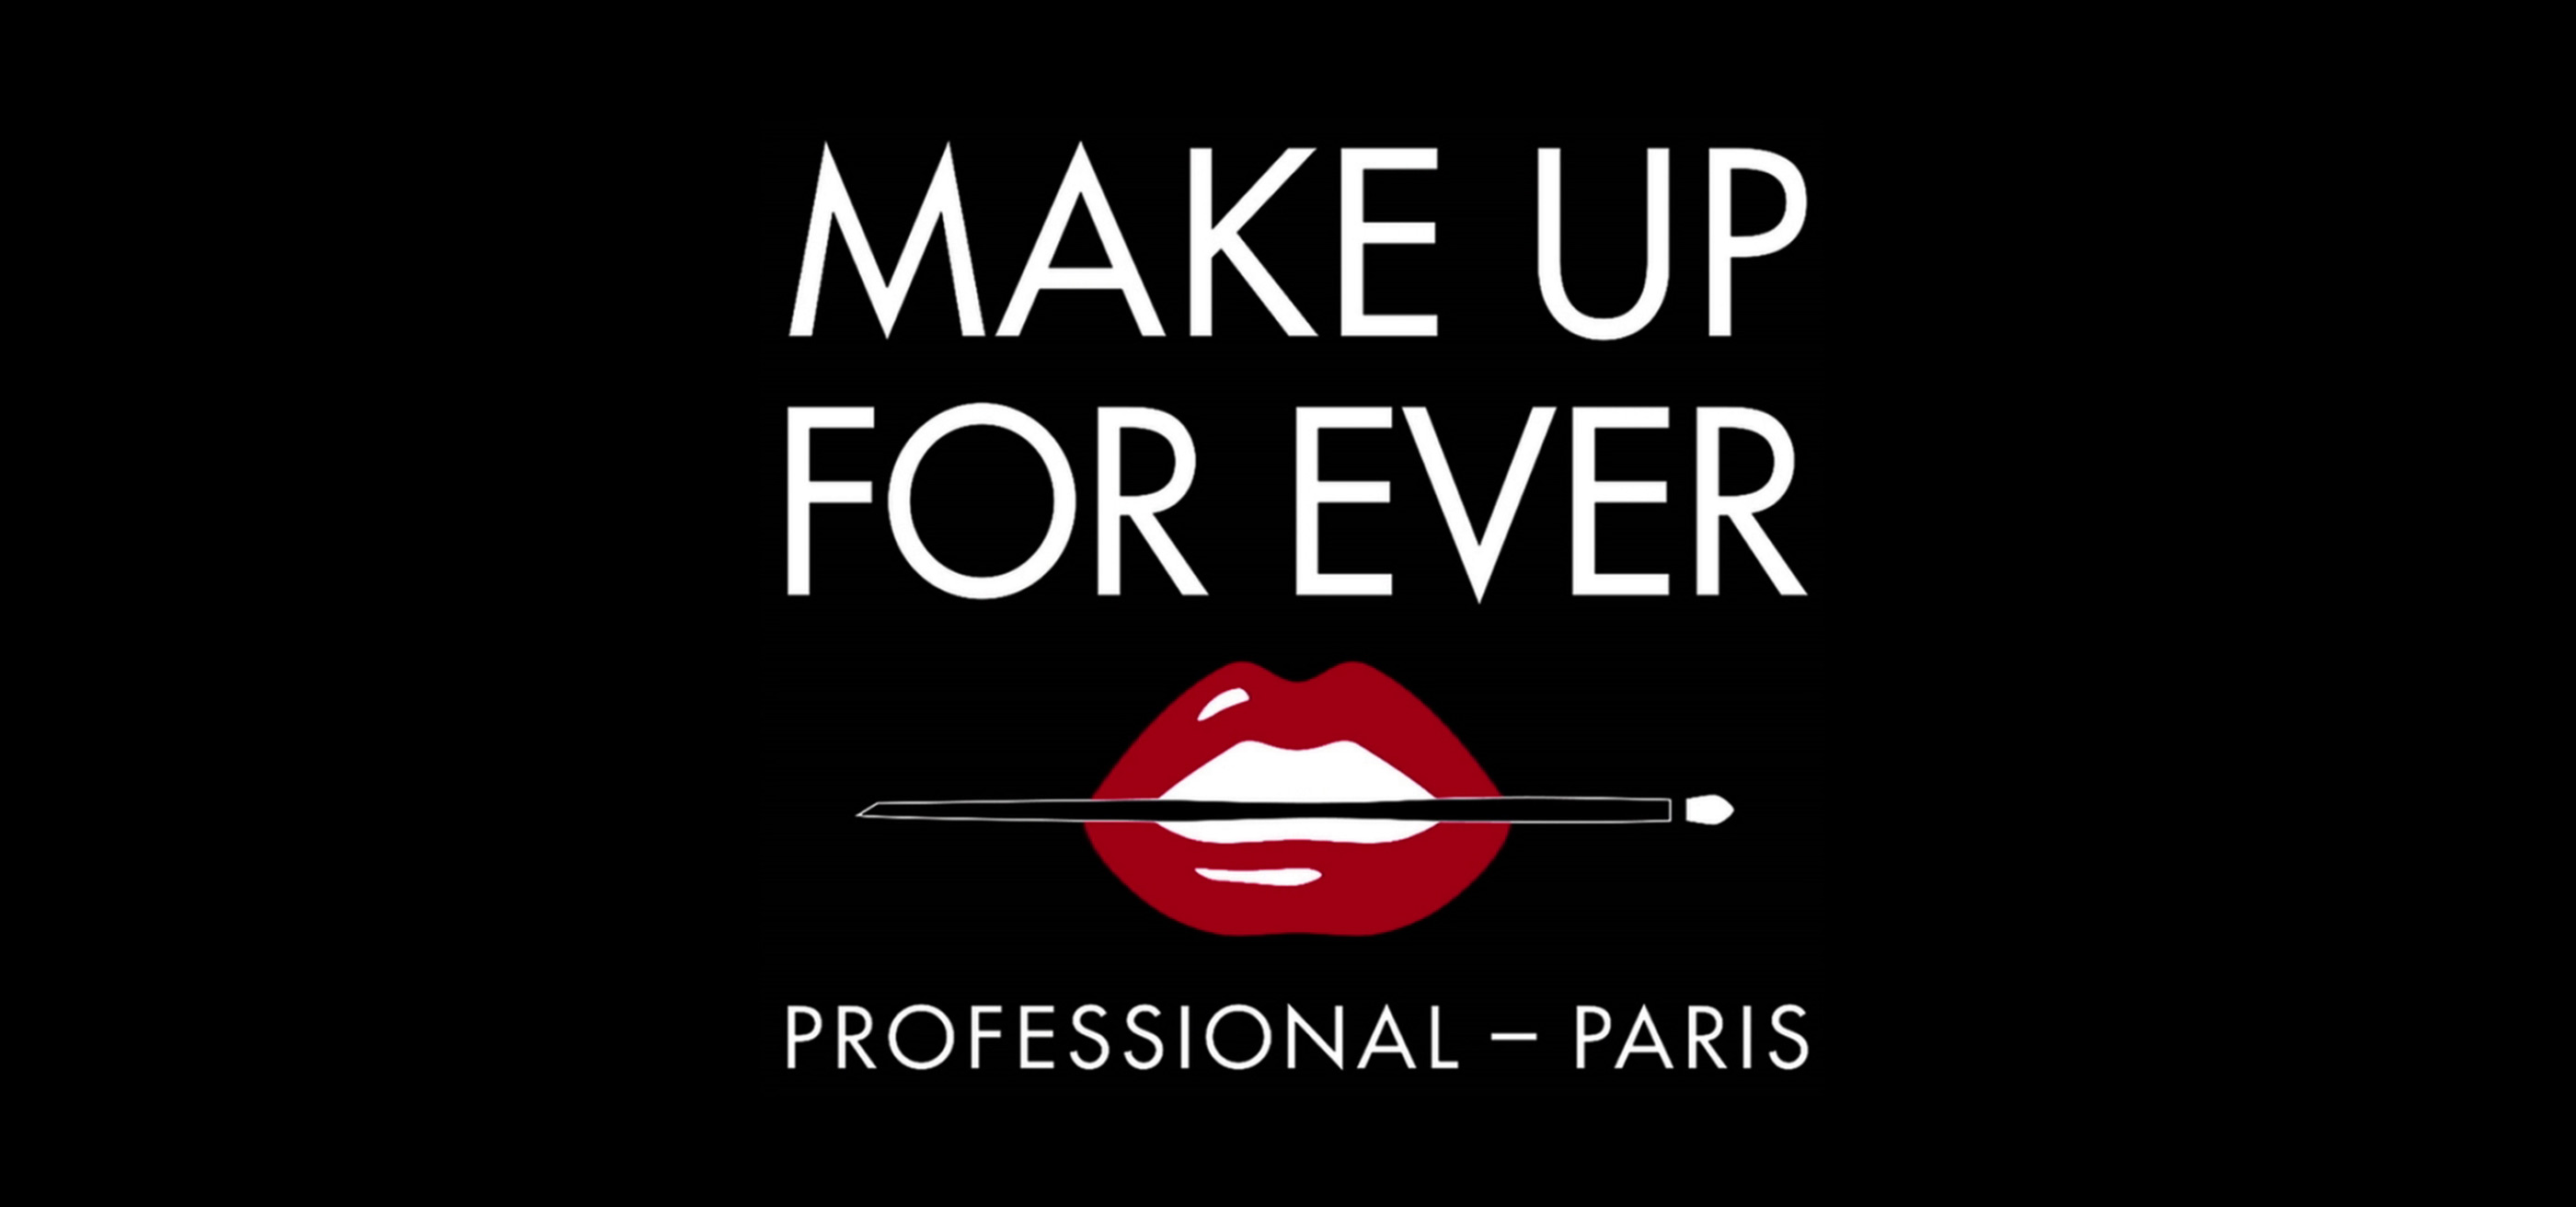  Make  Up  For Ever  maquillage professionnel  Parfums 